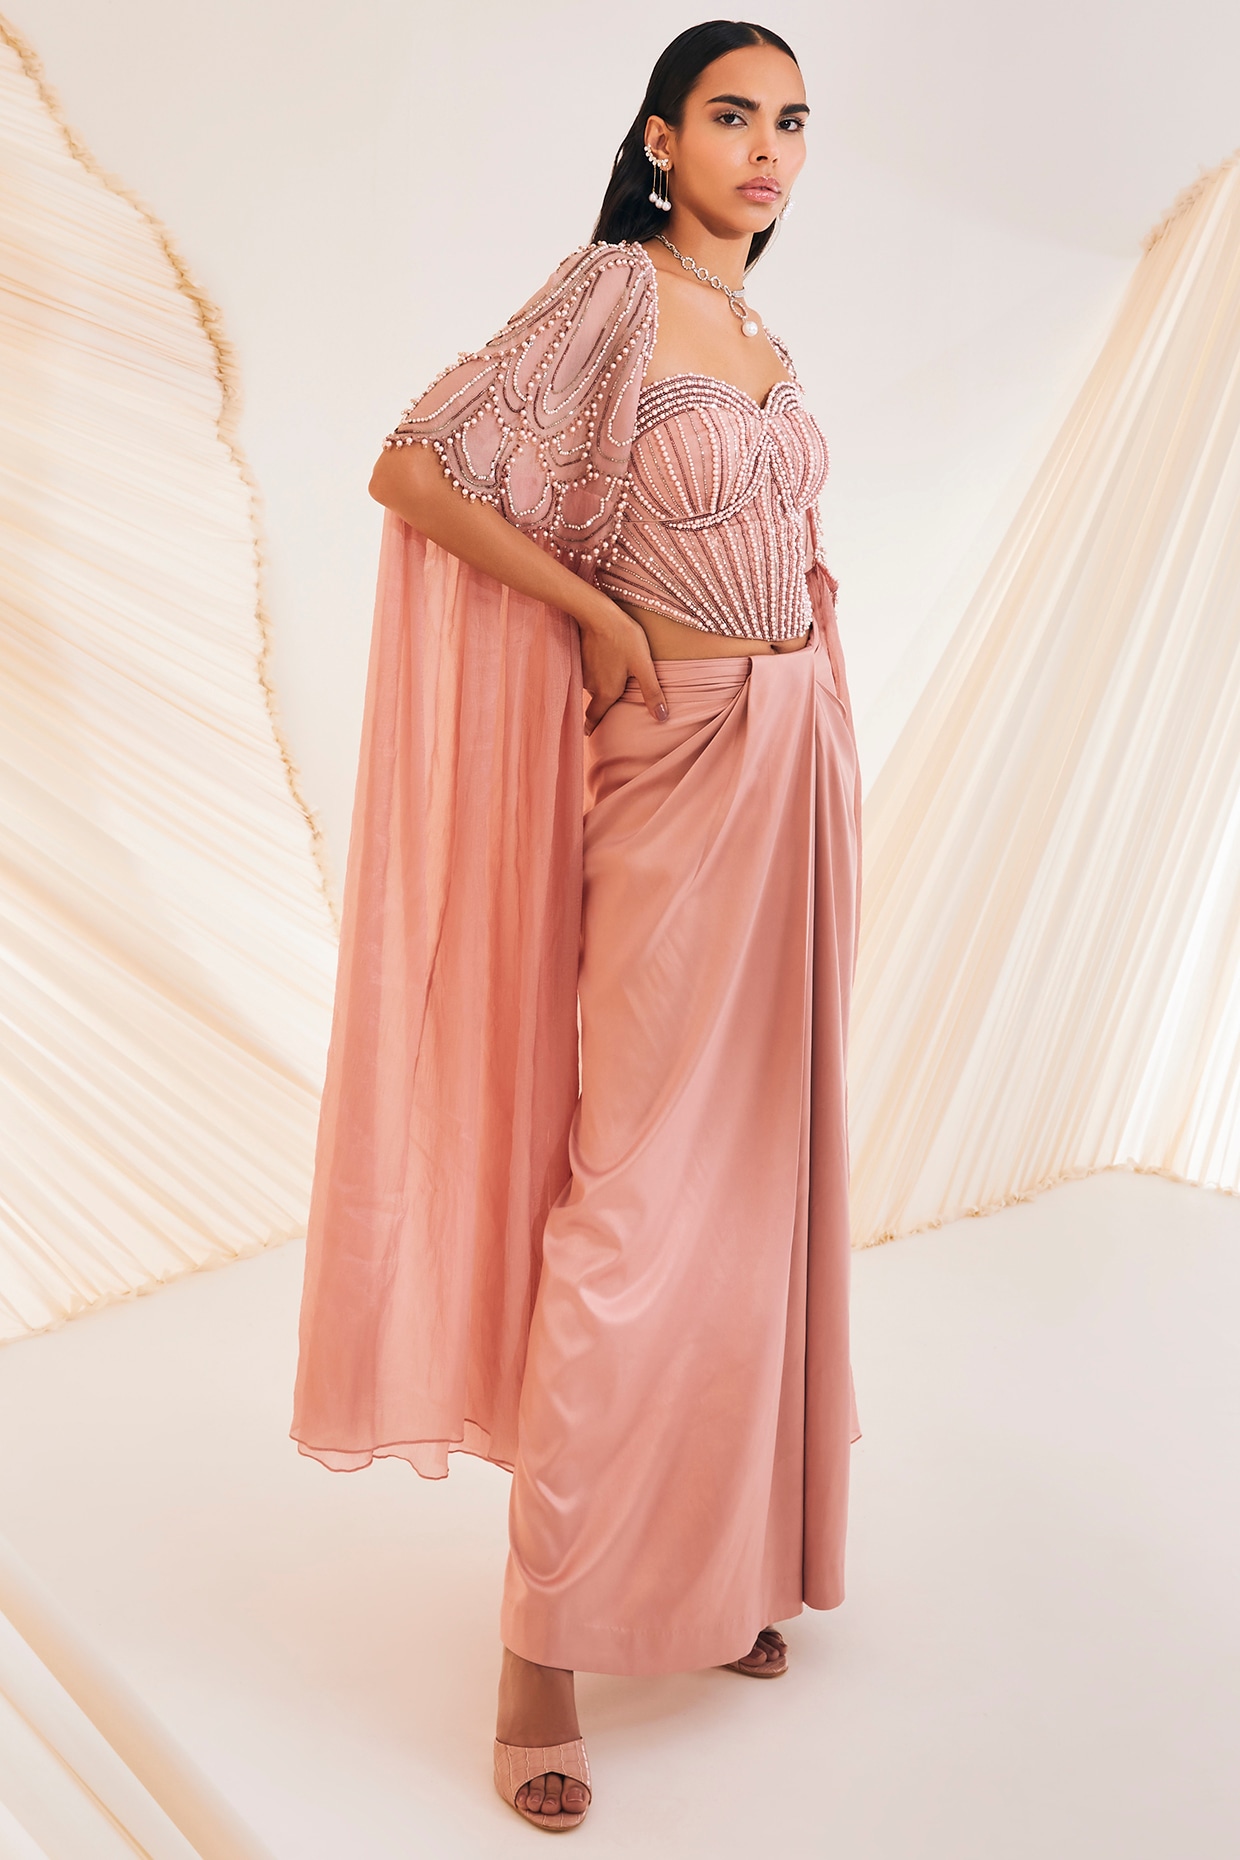 Ombre Embellished Gown With Cape – Rohit Gandhi & Rahul Khanna